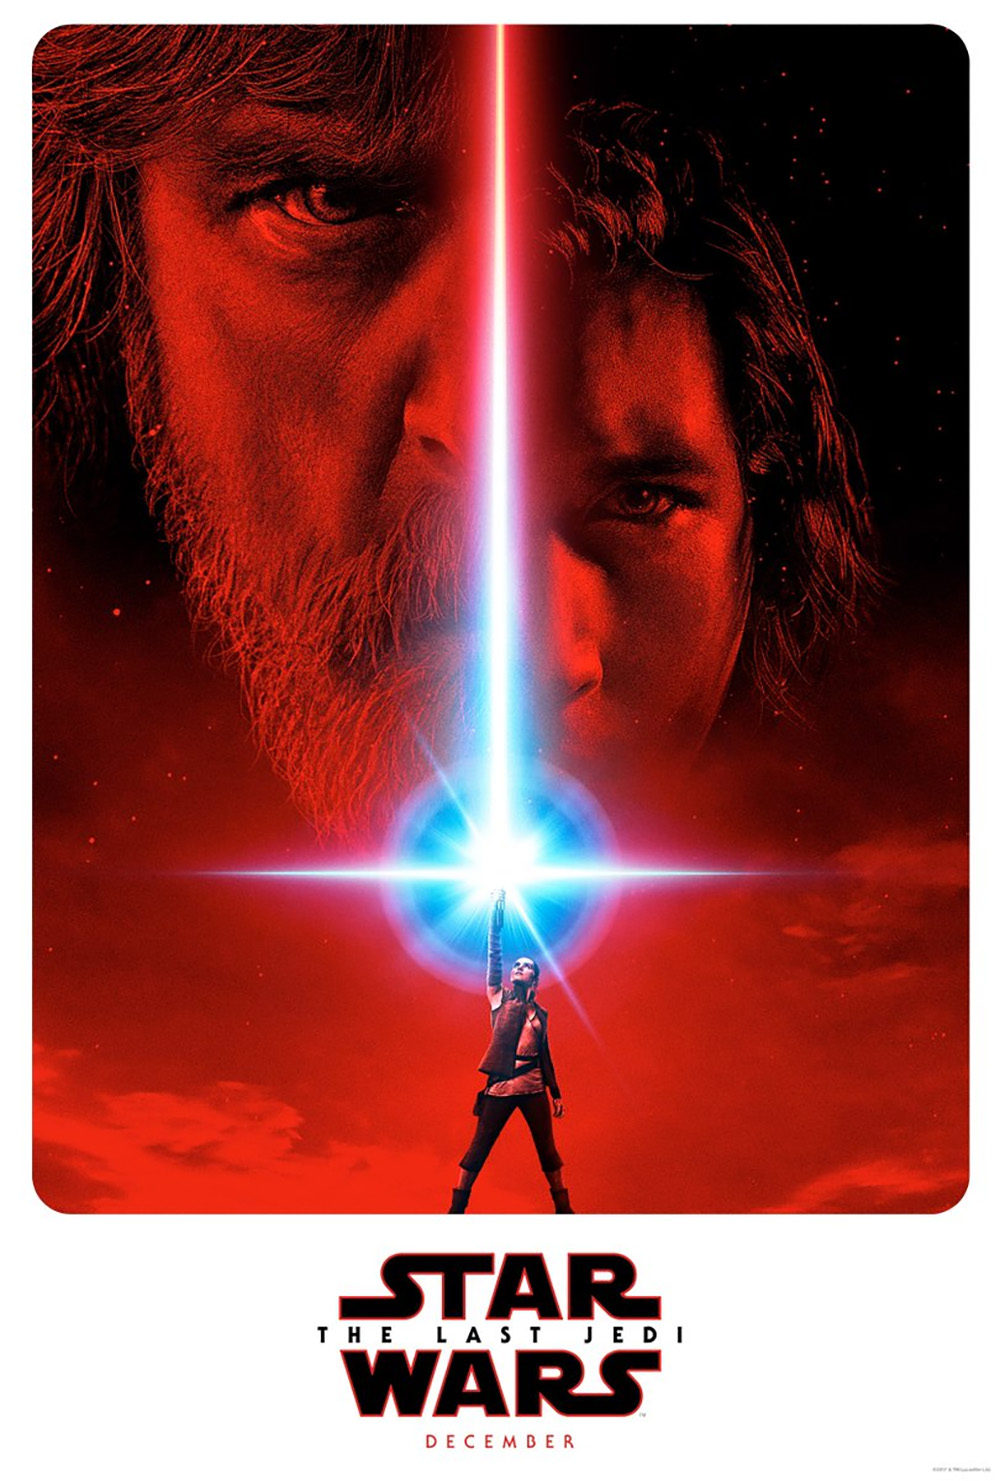 Watch the debut trailer for Star Wars: The Last Jedi